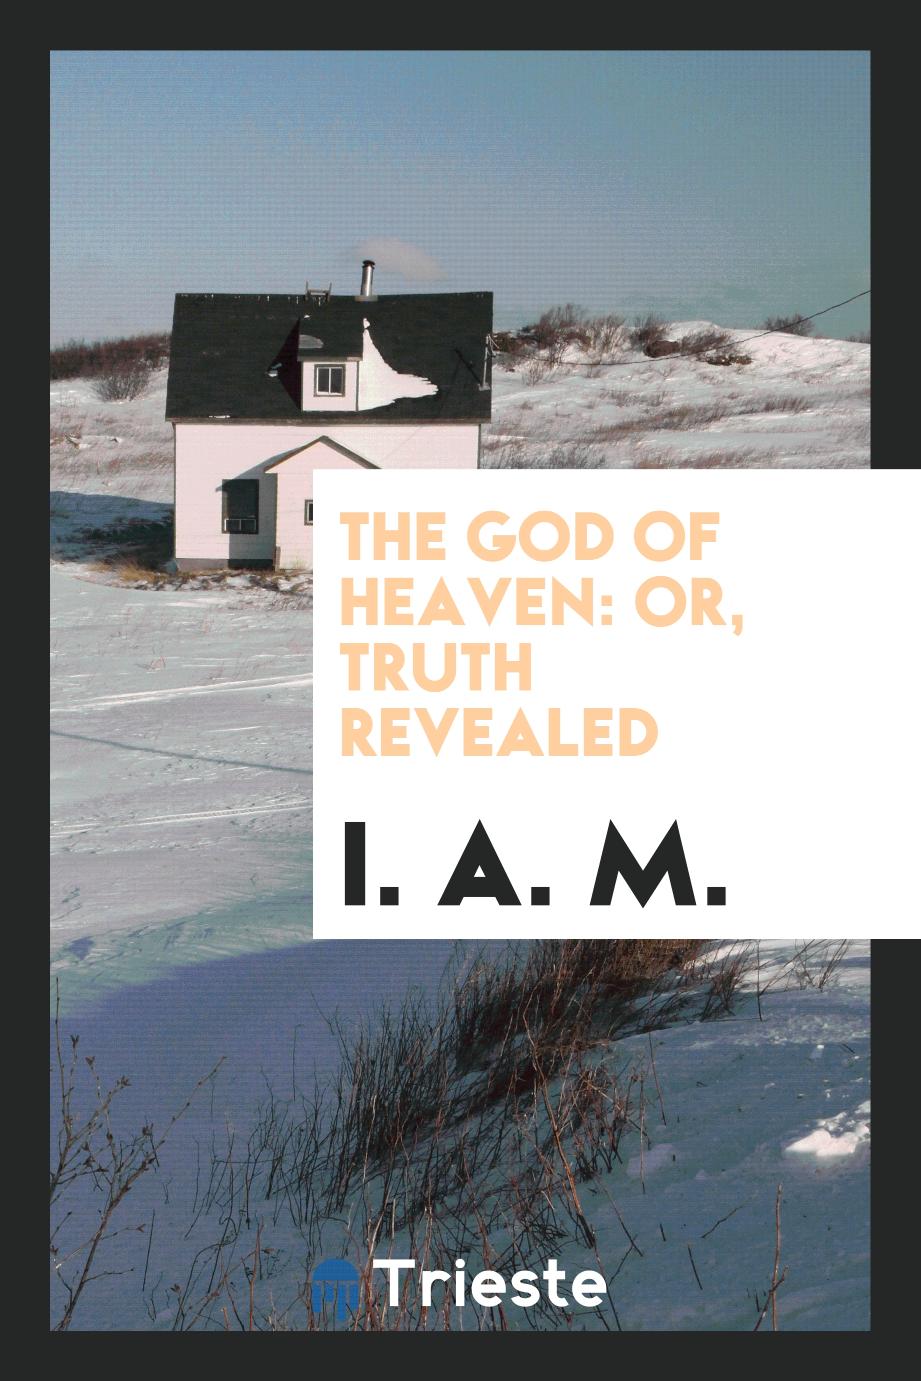 The God of Heaven: Or, Truth Revealed